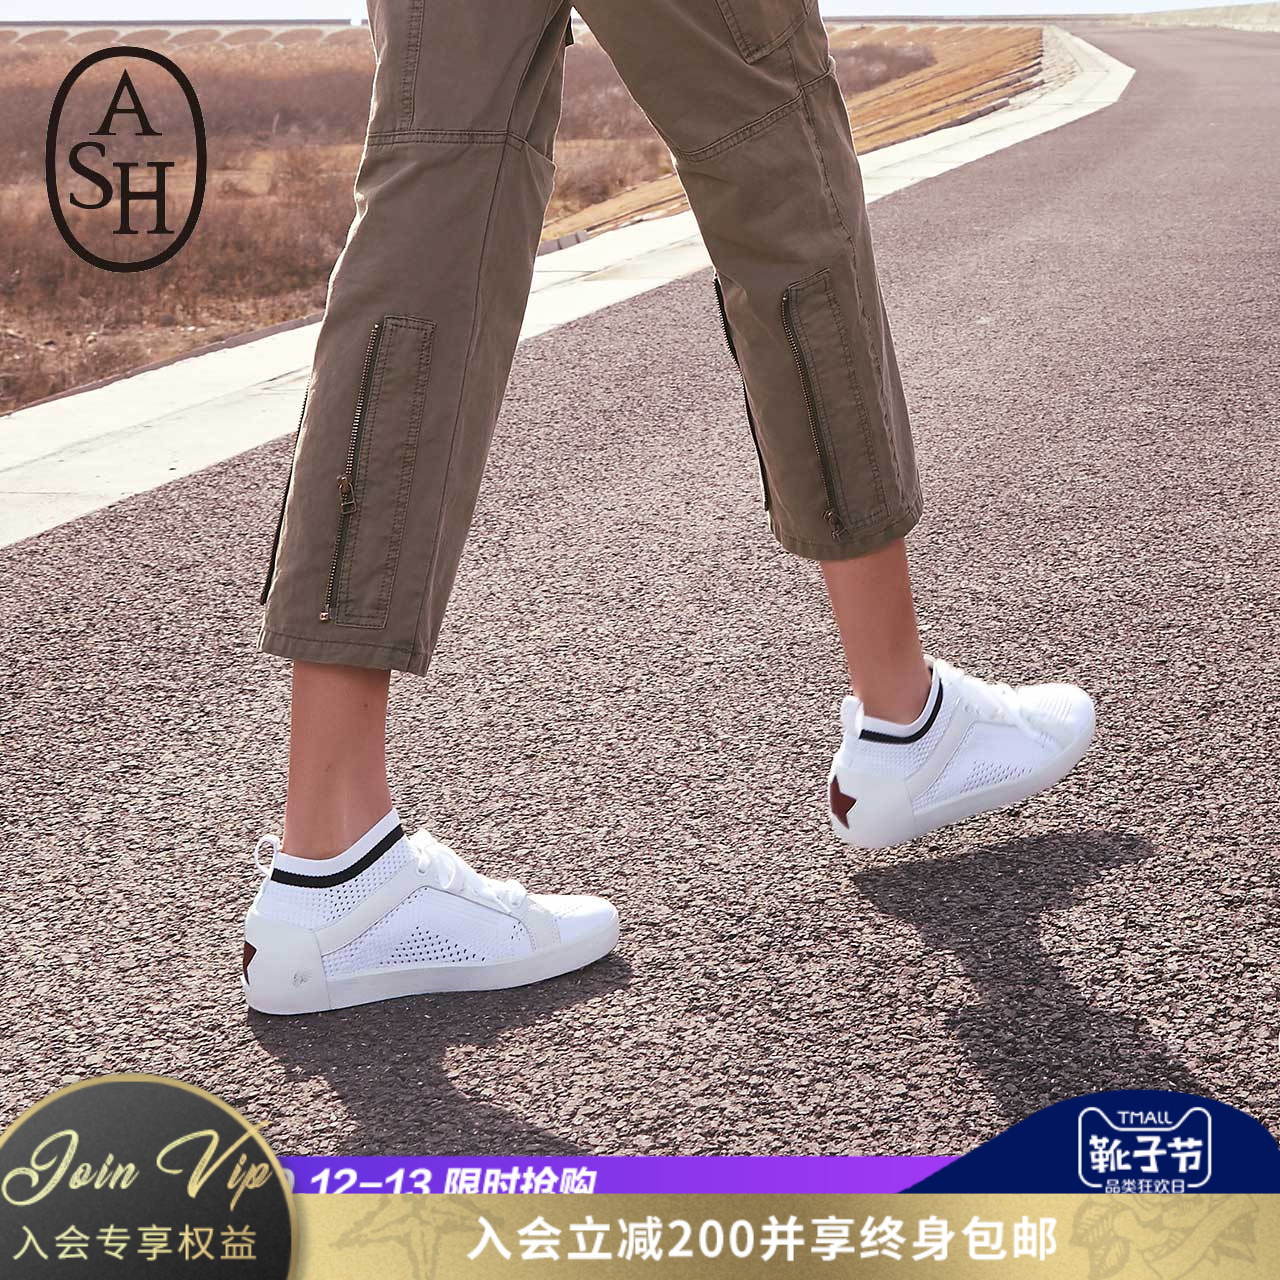 [double 11 pre sale] ash women's shoes new Nolita knitting hosiery casual sports single shoes small white shoes board shoes